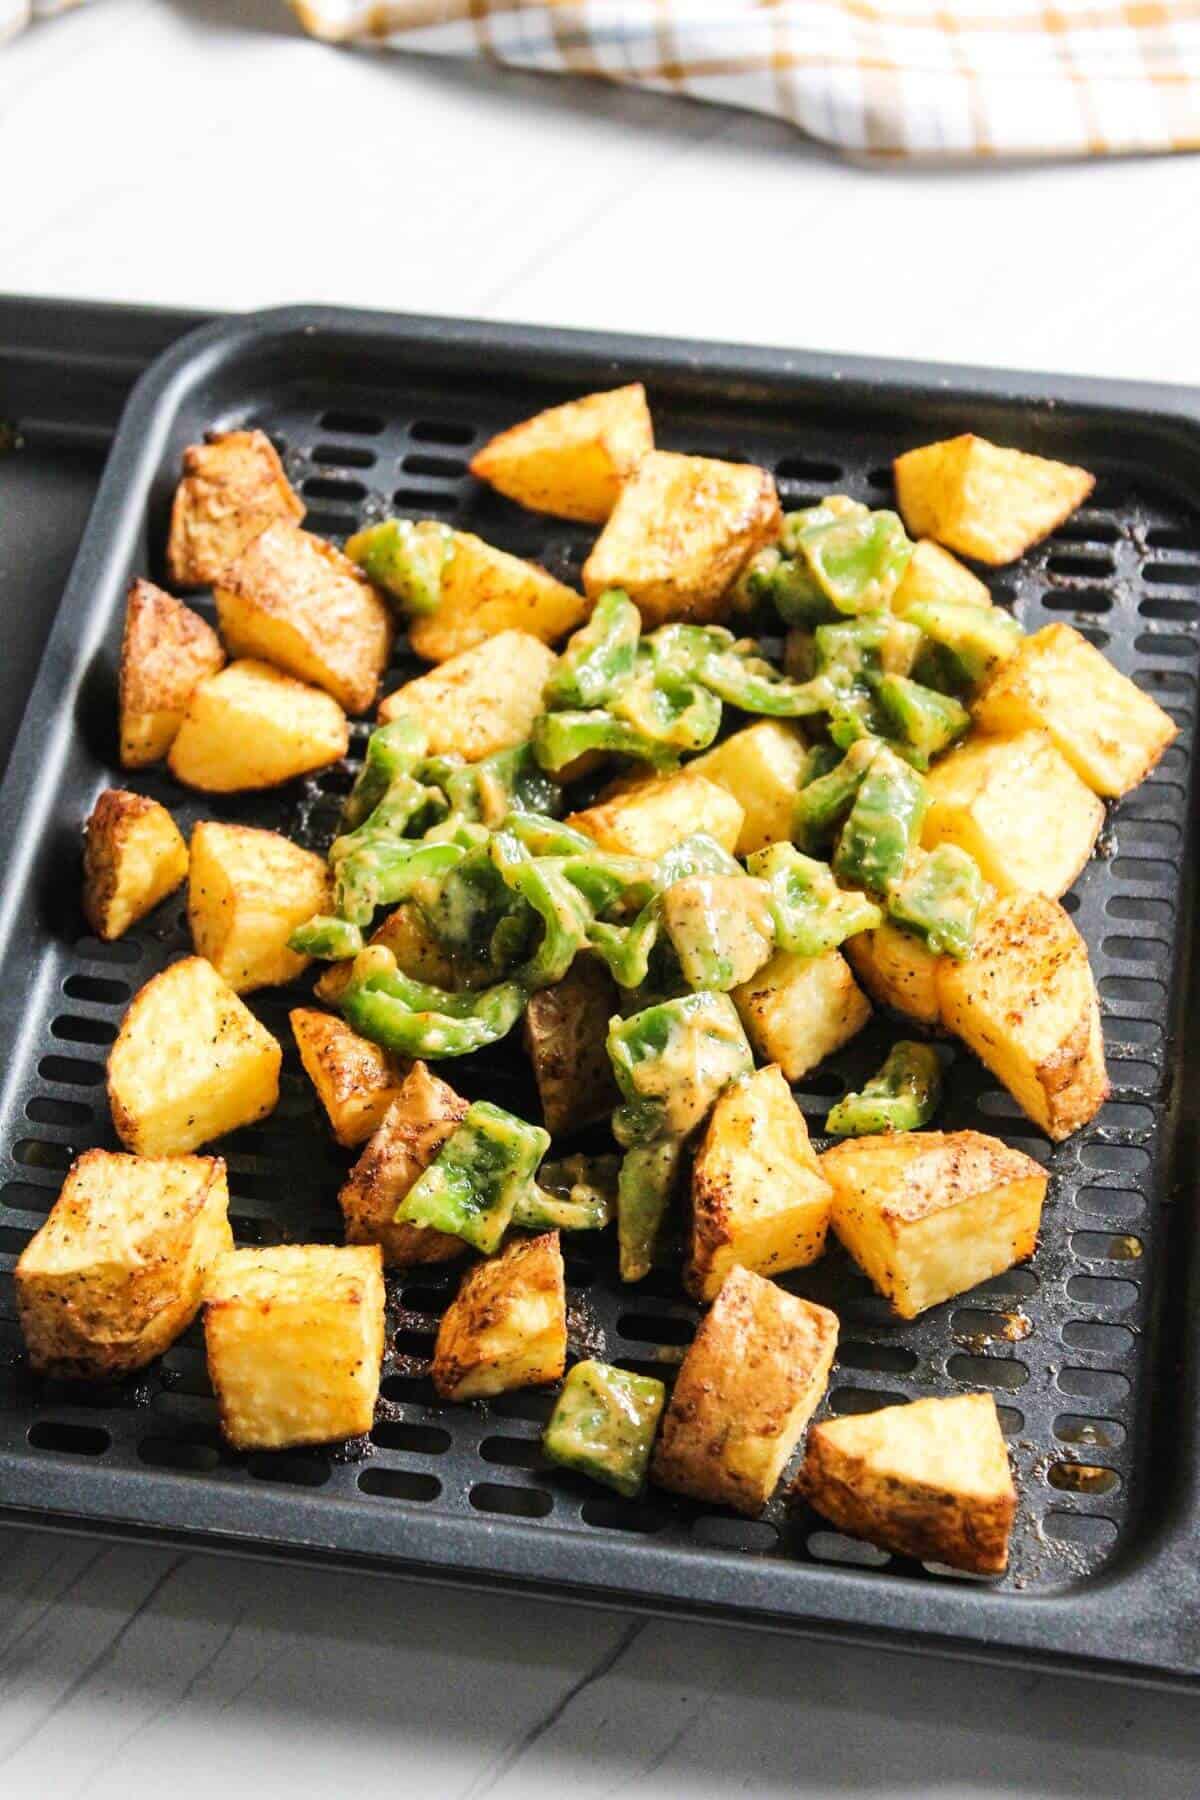 Green bell pepper added to potato chunks on tray.